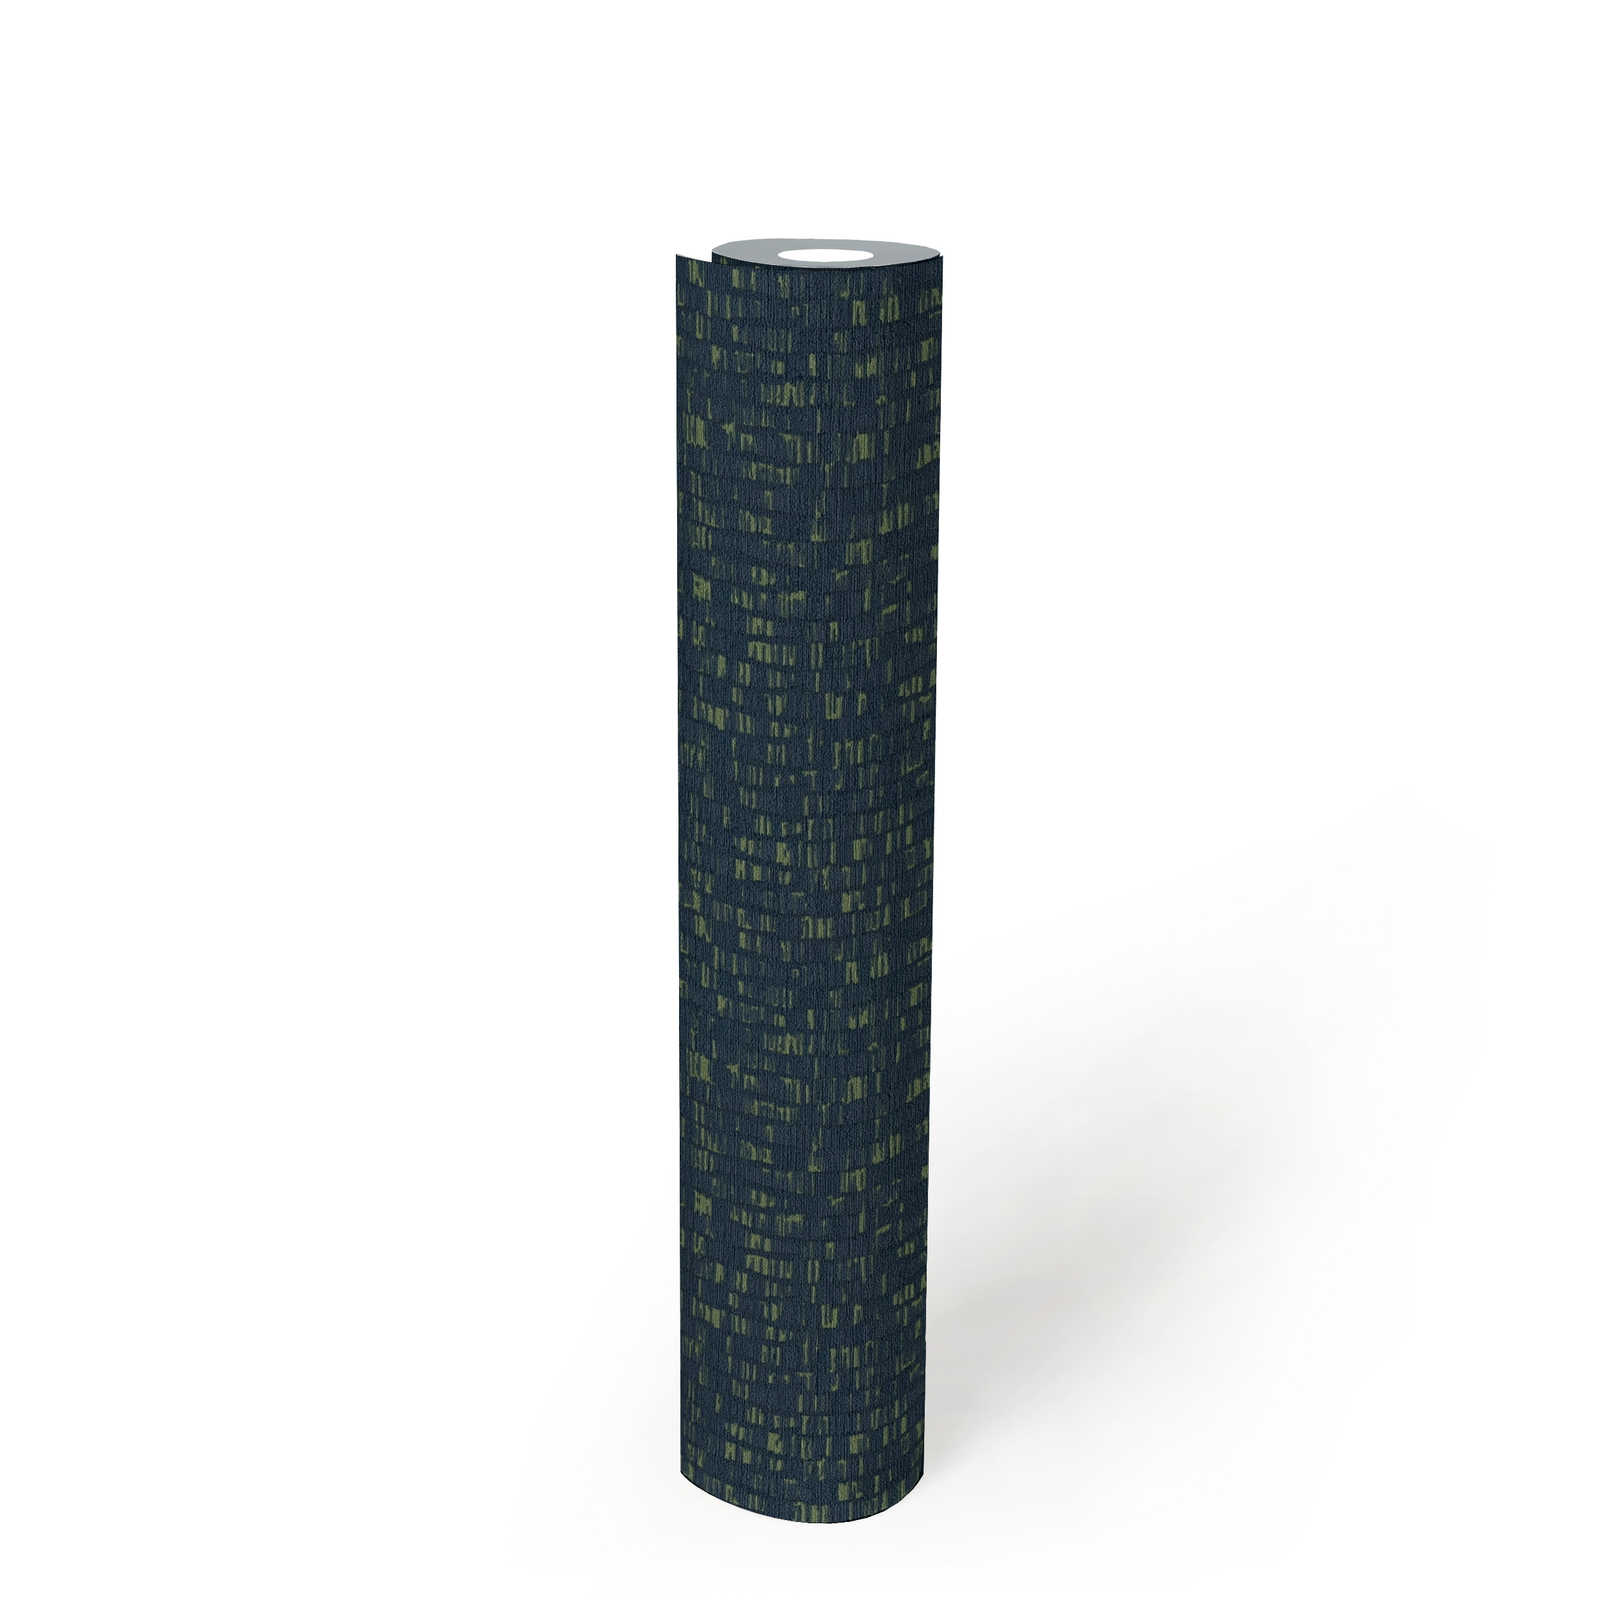             Non-woven wallpaper with discreet pattern - blue, green
        